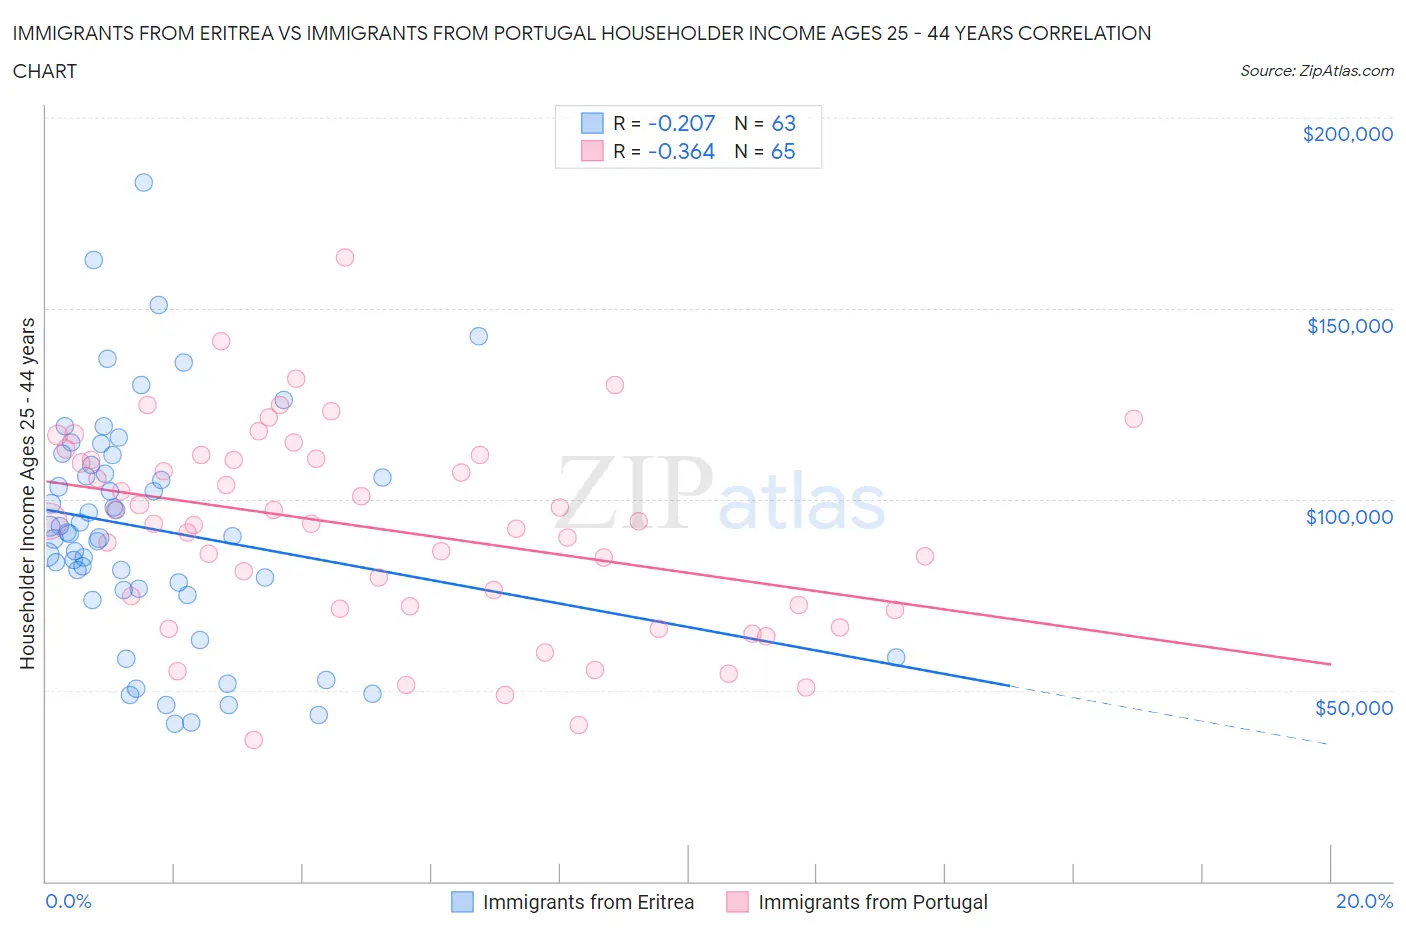 Immigrants from Eritrea vs Immigrants from Portugal Householder Income Ages 25 - 44 years